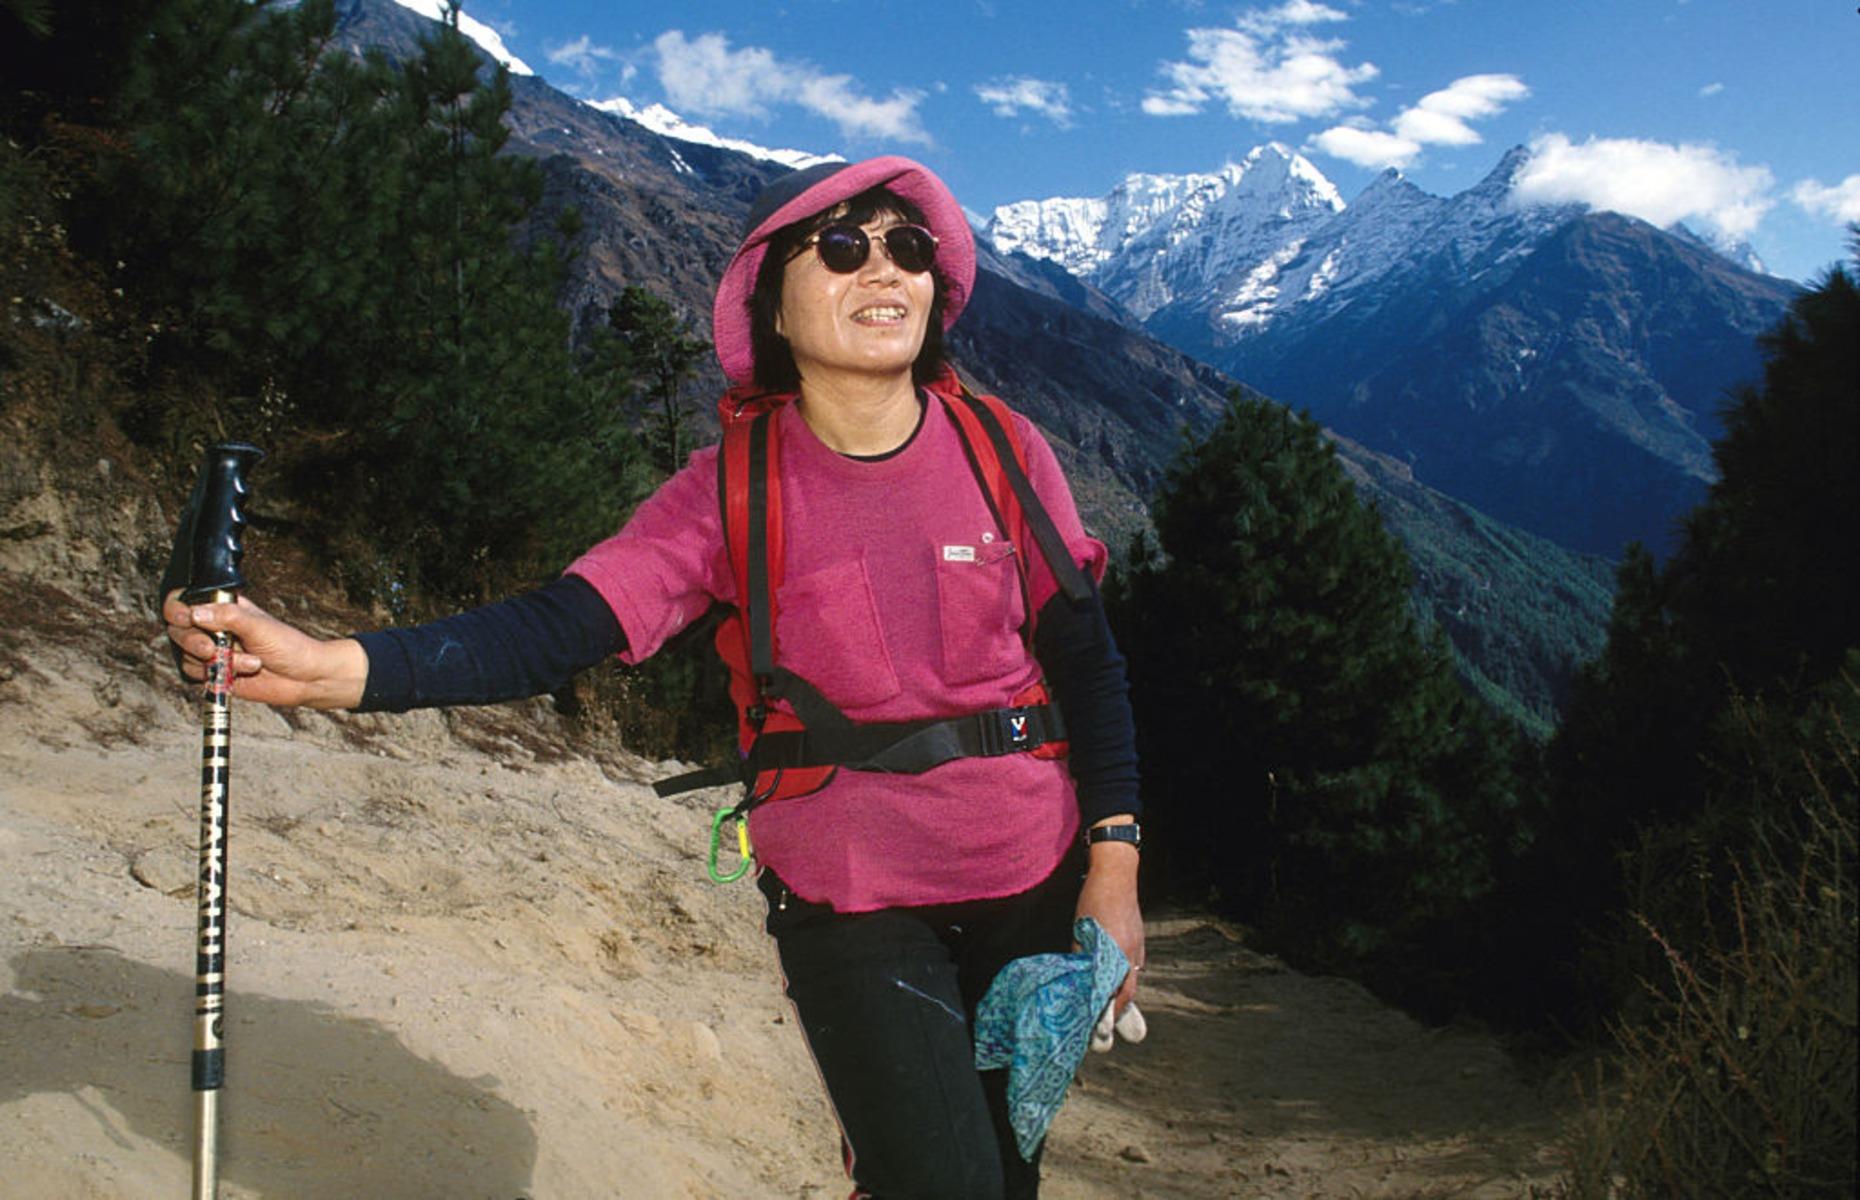 With people commenting that she should concentrate on raising children instead, Japanese adventurer Junko Tabei ignored the detractors she encountered as a young female mountaineer. As the first woman to conquer Mount Everest, Tabei sealed her name in the history books forever, but it was no easy feat. In 1975, during her Everest climb, Tabei was woken by an avalanche and, along with her team, would have been killed were it not for the fast-acting Sherpas, who dragged them out by their ankles.